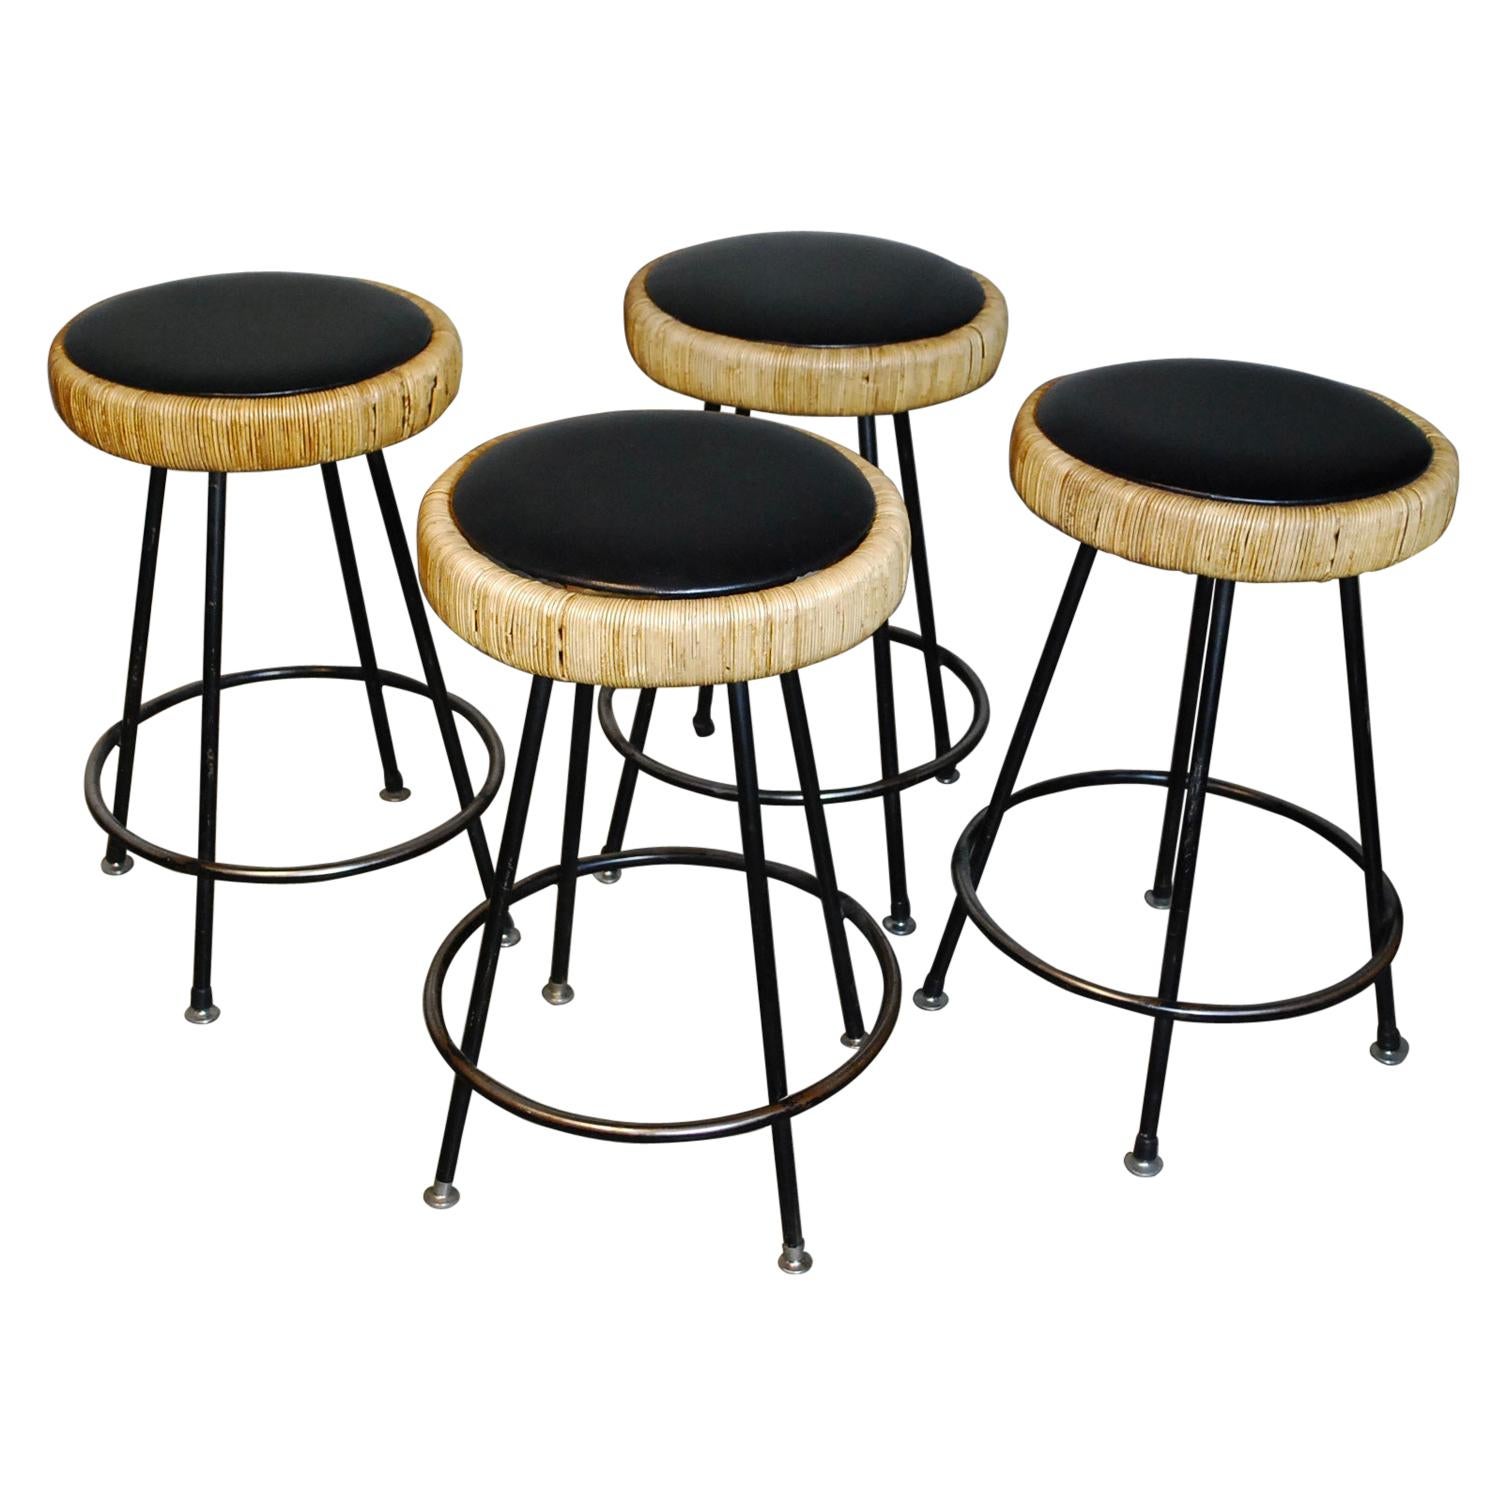 Set of Four Tropical Counter Stools by Danny Ho Fong